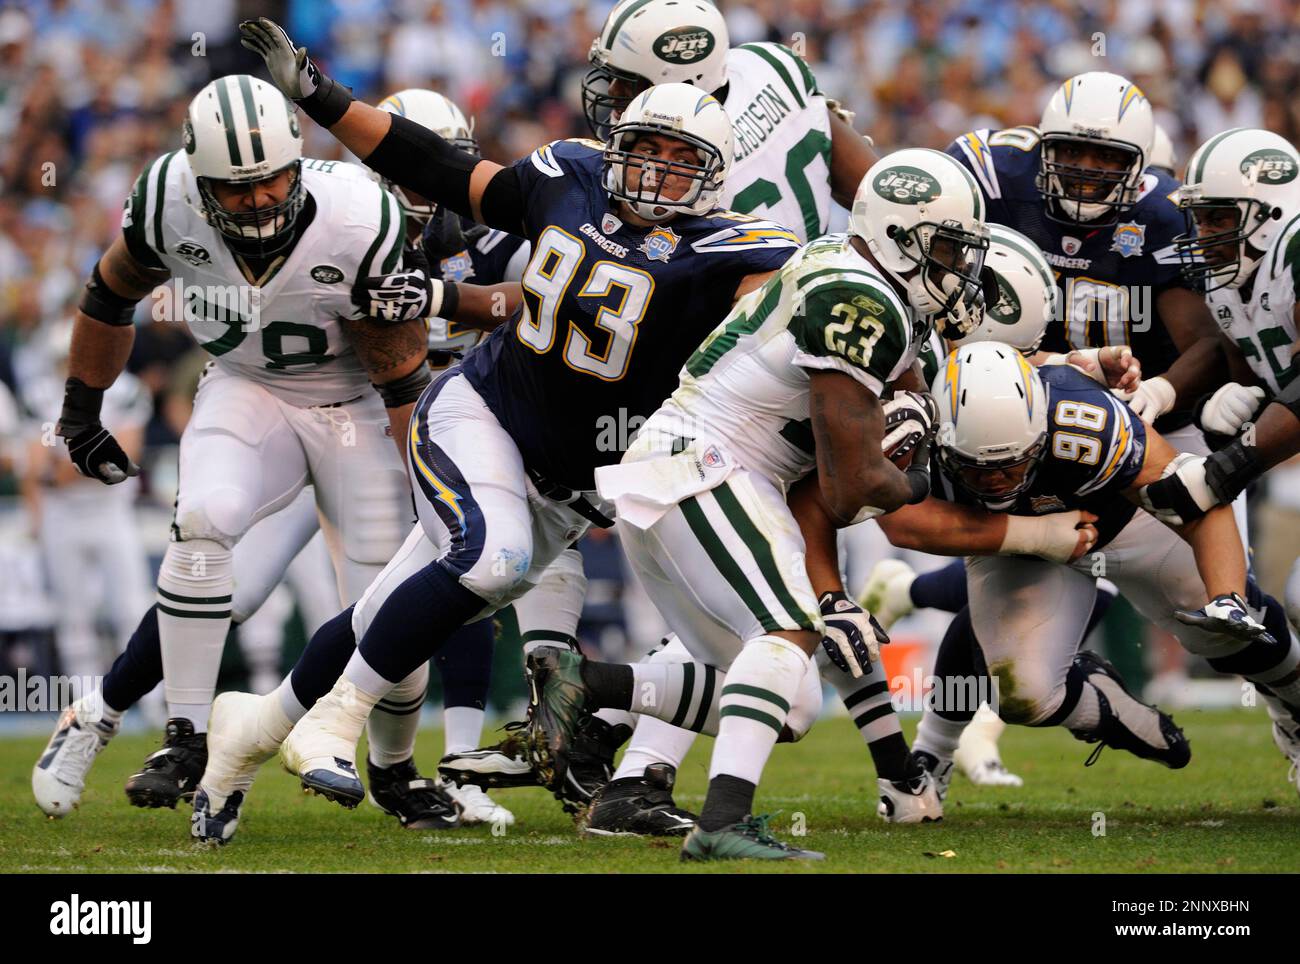 January 17, 2010: San Diego Chargers defensive tackle Luis Castillo (93)  reaches for New York Jets running back Shonn Greene (23)during the AFC  Divisional playoff at Qualcomm Stadium in San Diego, CA . (